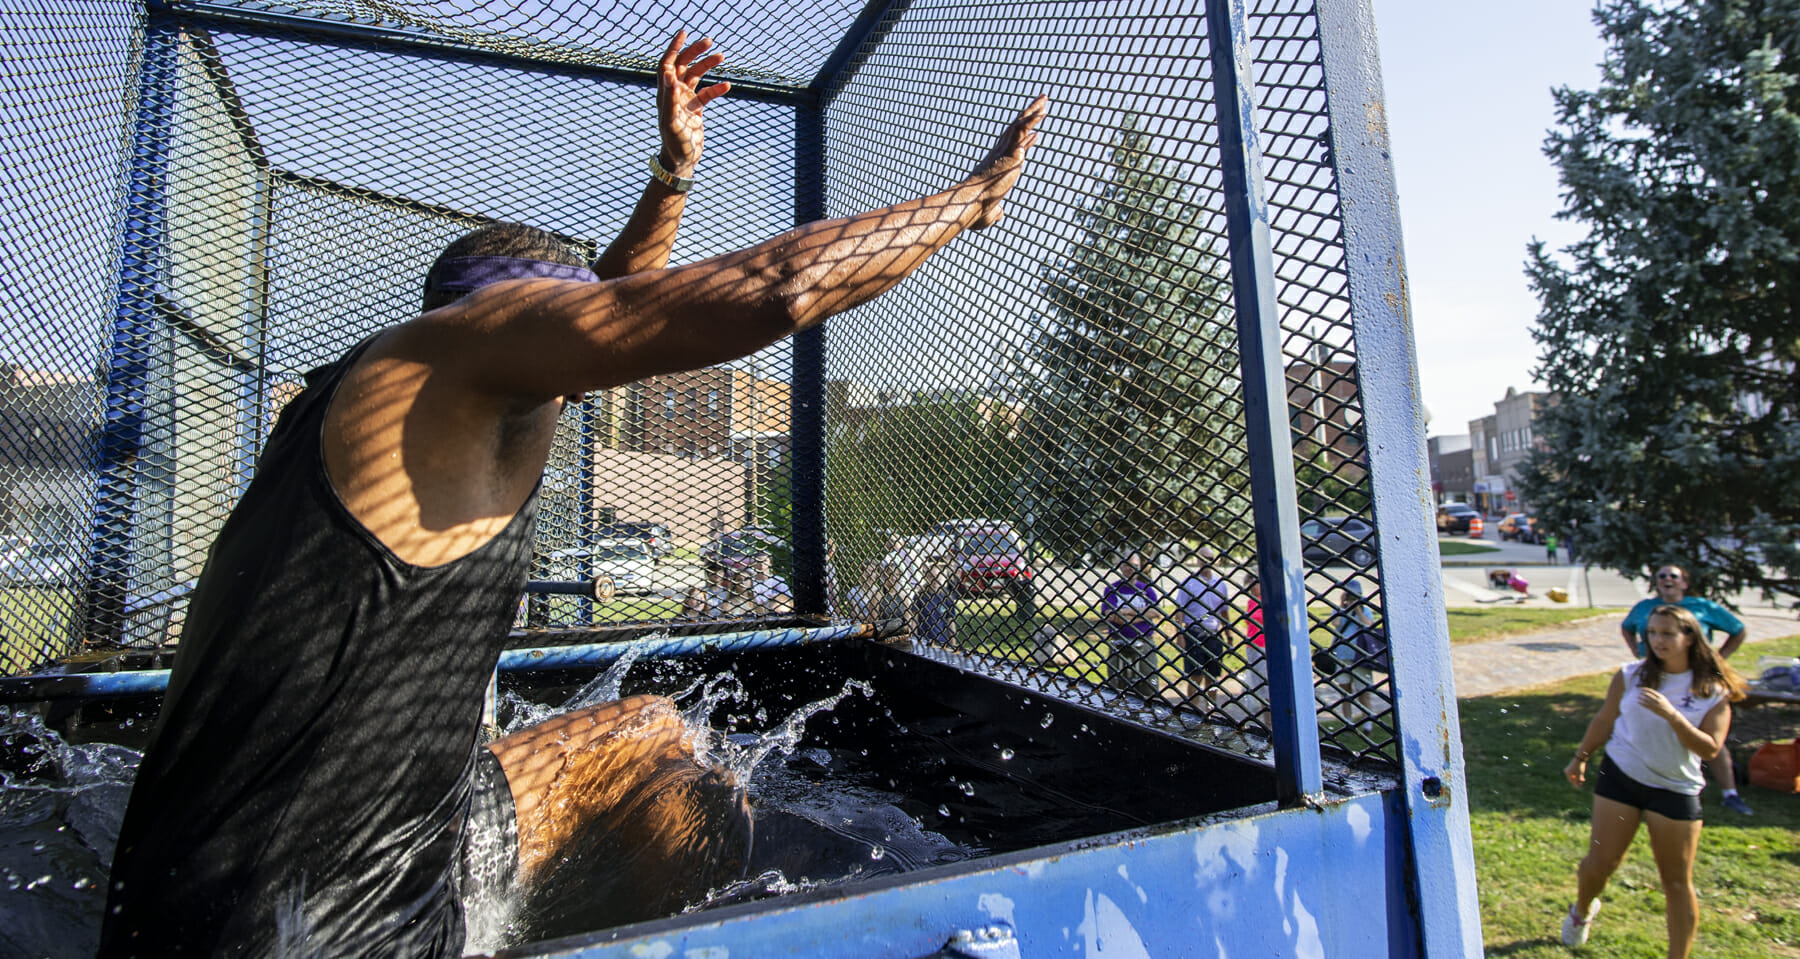 Coach Jeter getting dunked in the celebrity dunk tank